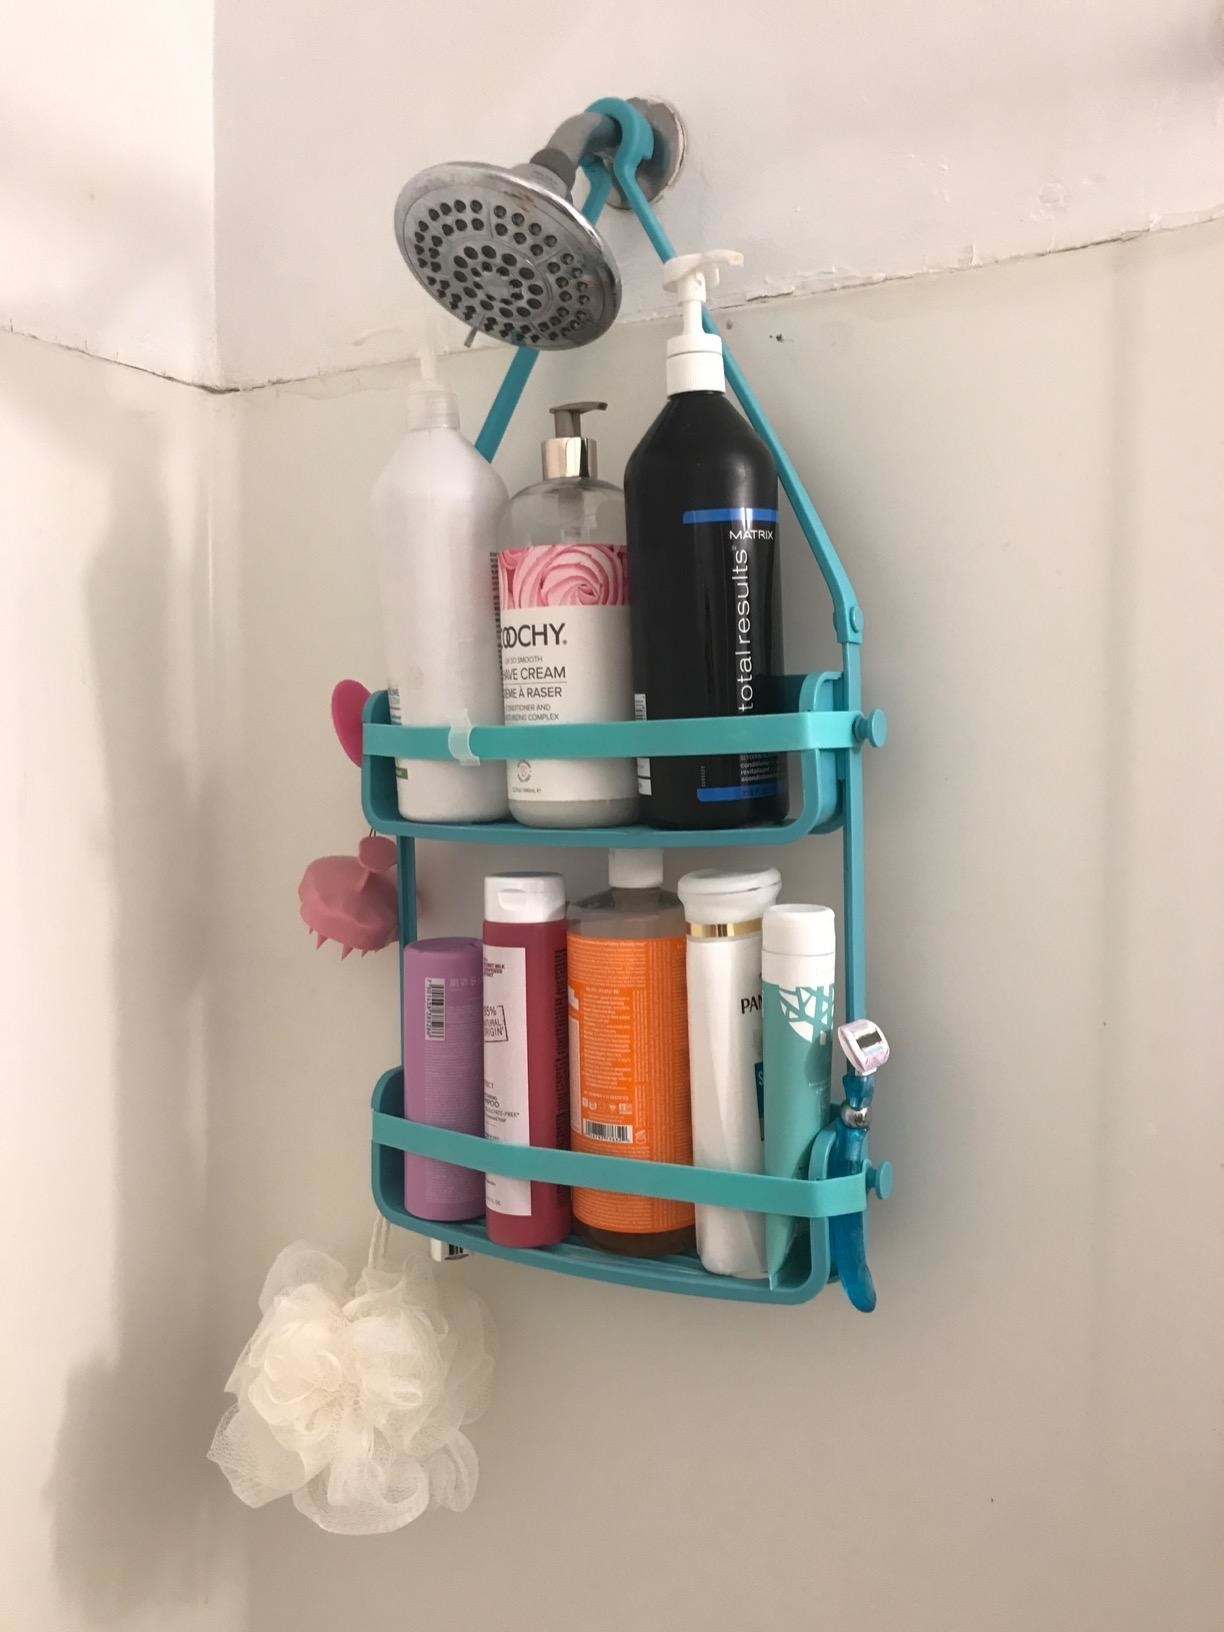 The caddy holding various tubes and hanging from the shower head